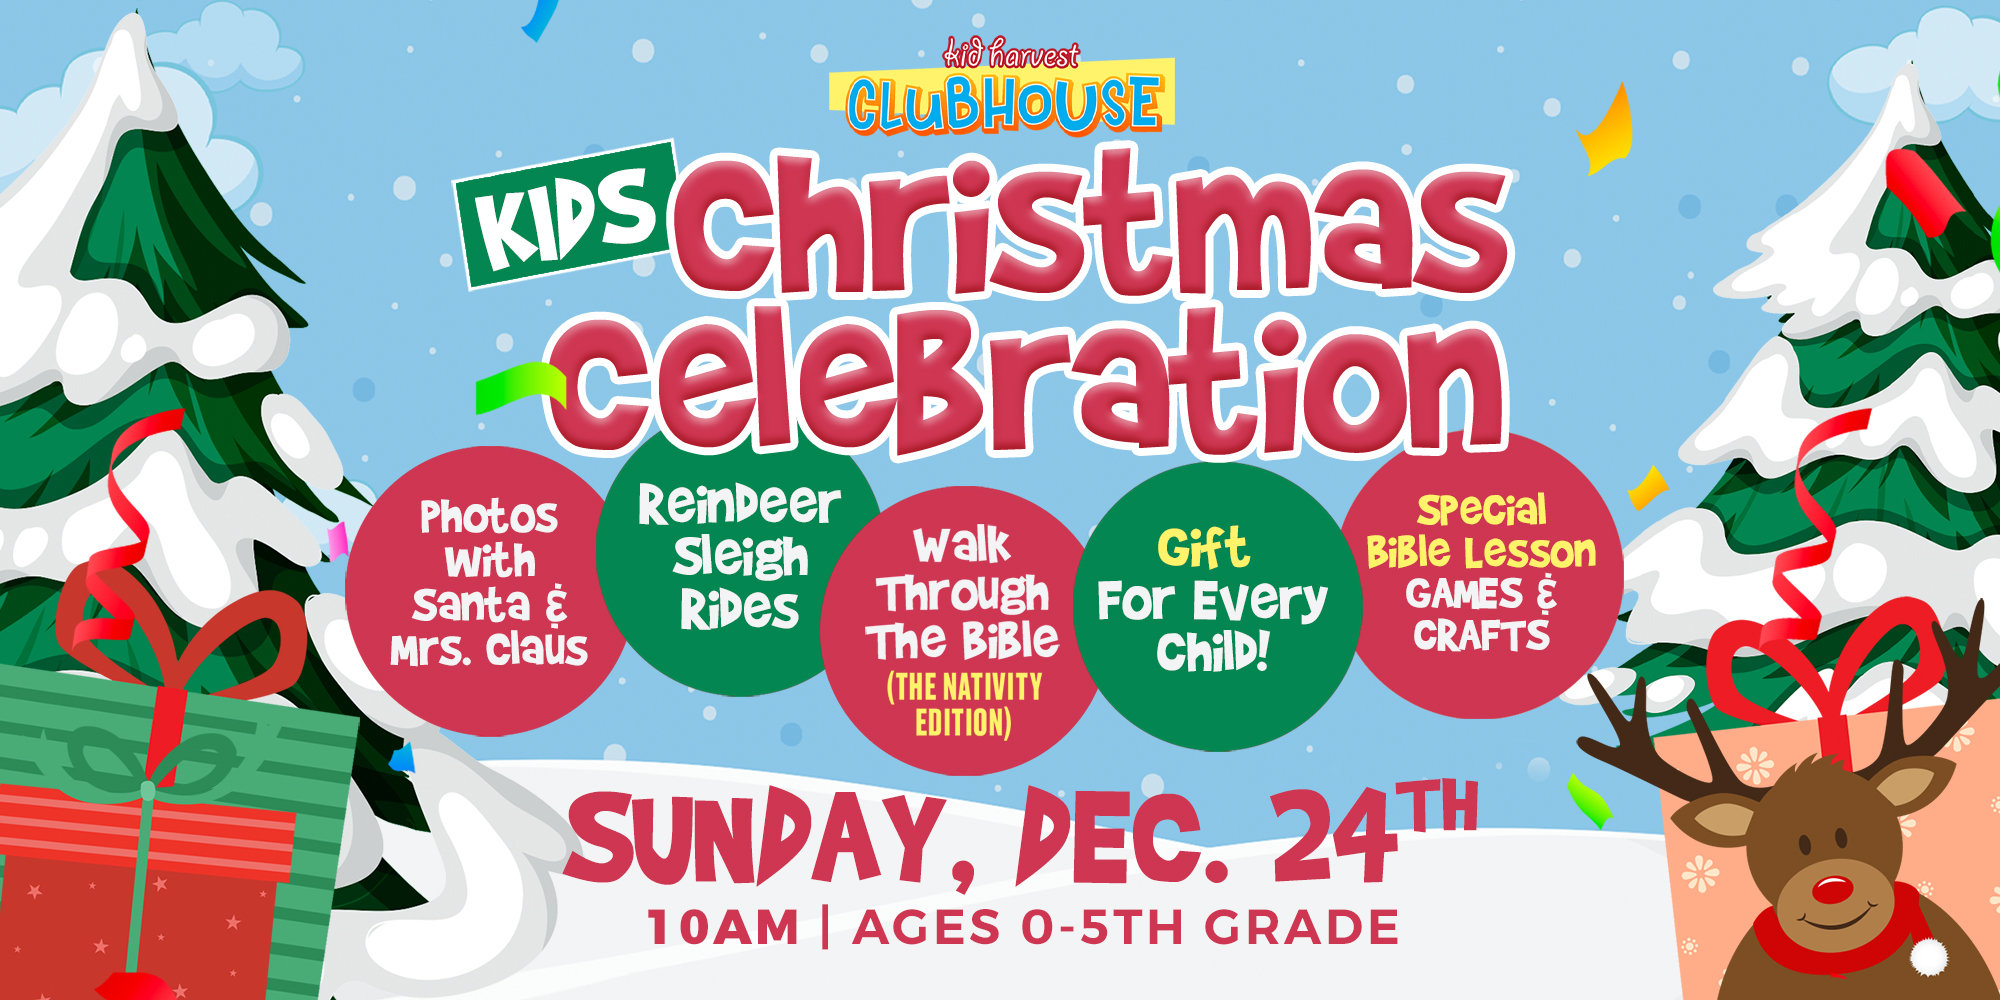 Sunday, Dec. 24th 10am Kid Harvest Clubhouse Kids' Christmas Celebration - Photos with Santa And Mrs. Claus - Reindeer Sleigh Rides - Walk Through the Bible Nativity Scene - Gift For Every Child - Special Bible Lesson Games And Crafts